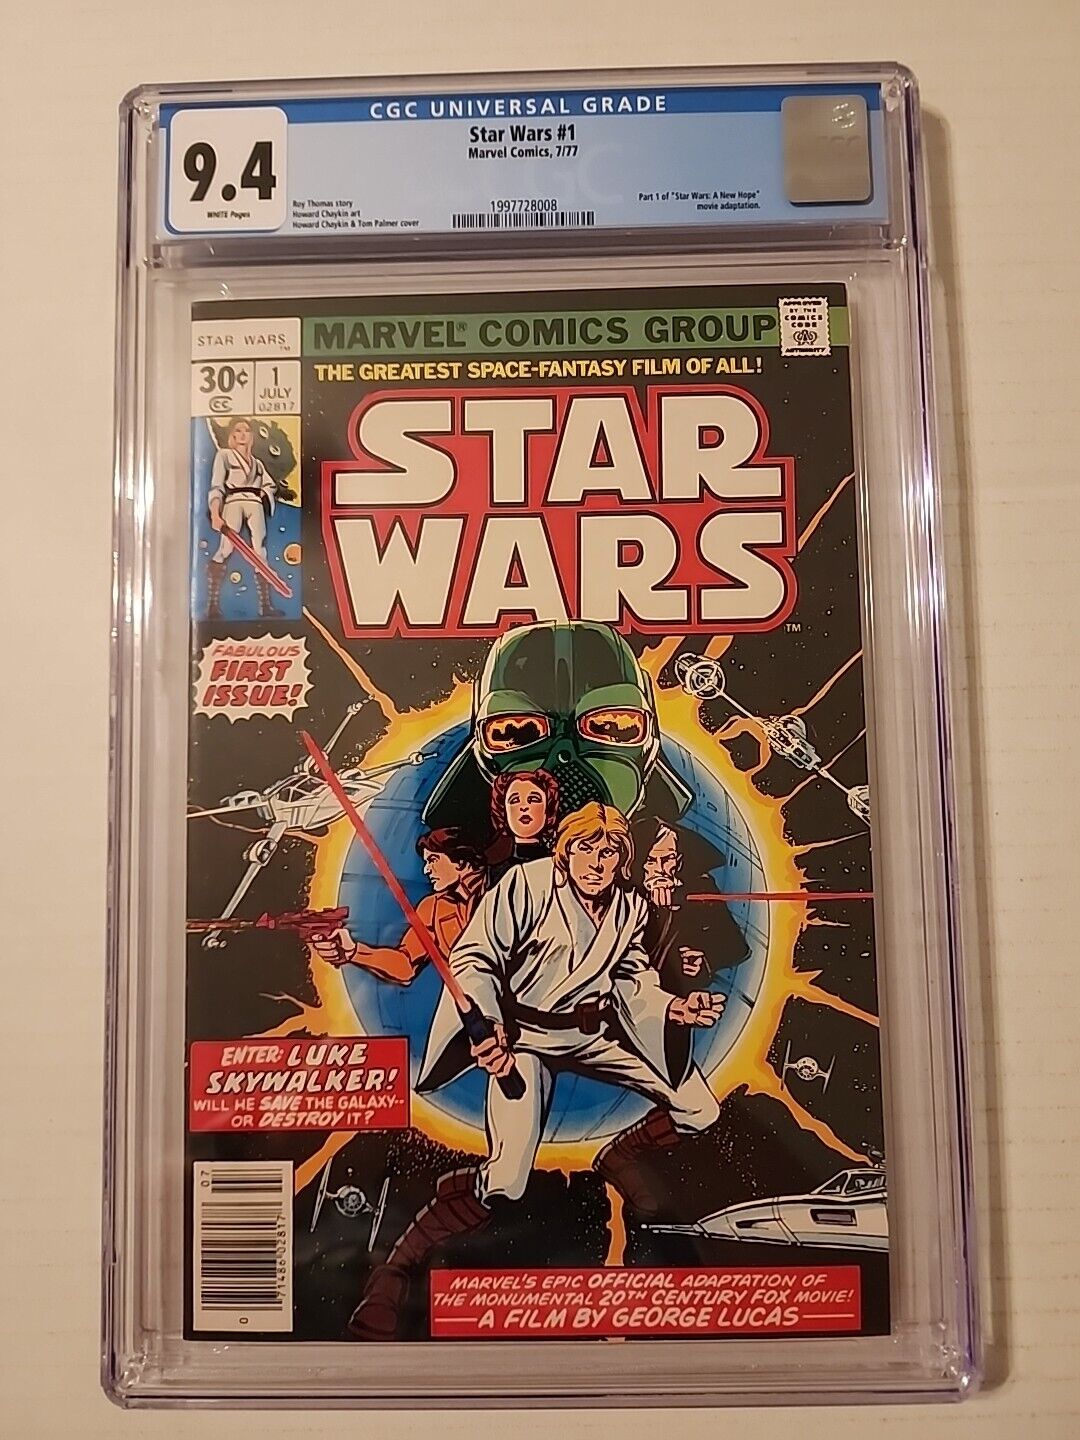 STAR WARS #1 CGC  9.4 White Pages 1977 Newsstand 1st printing Marvel Comics